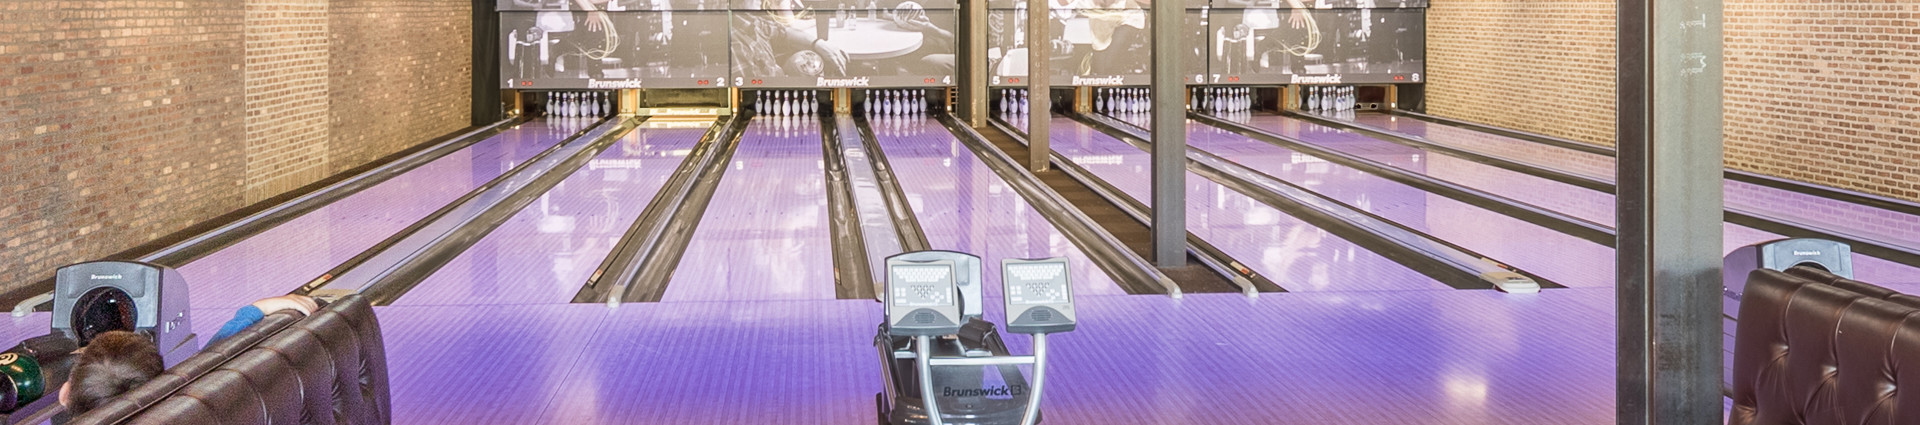 The Foundry bowling alley lanes